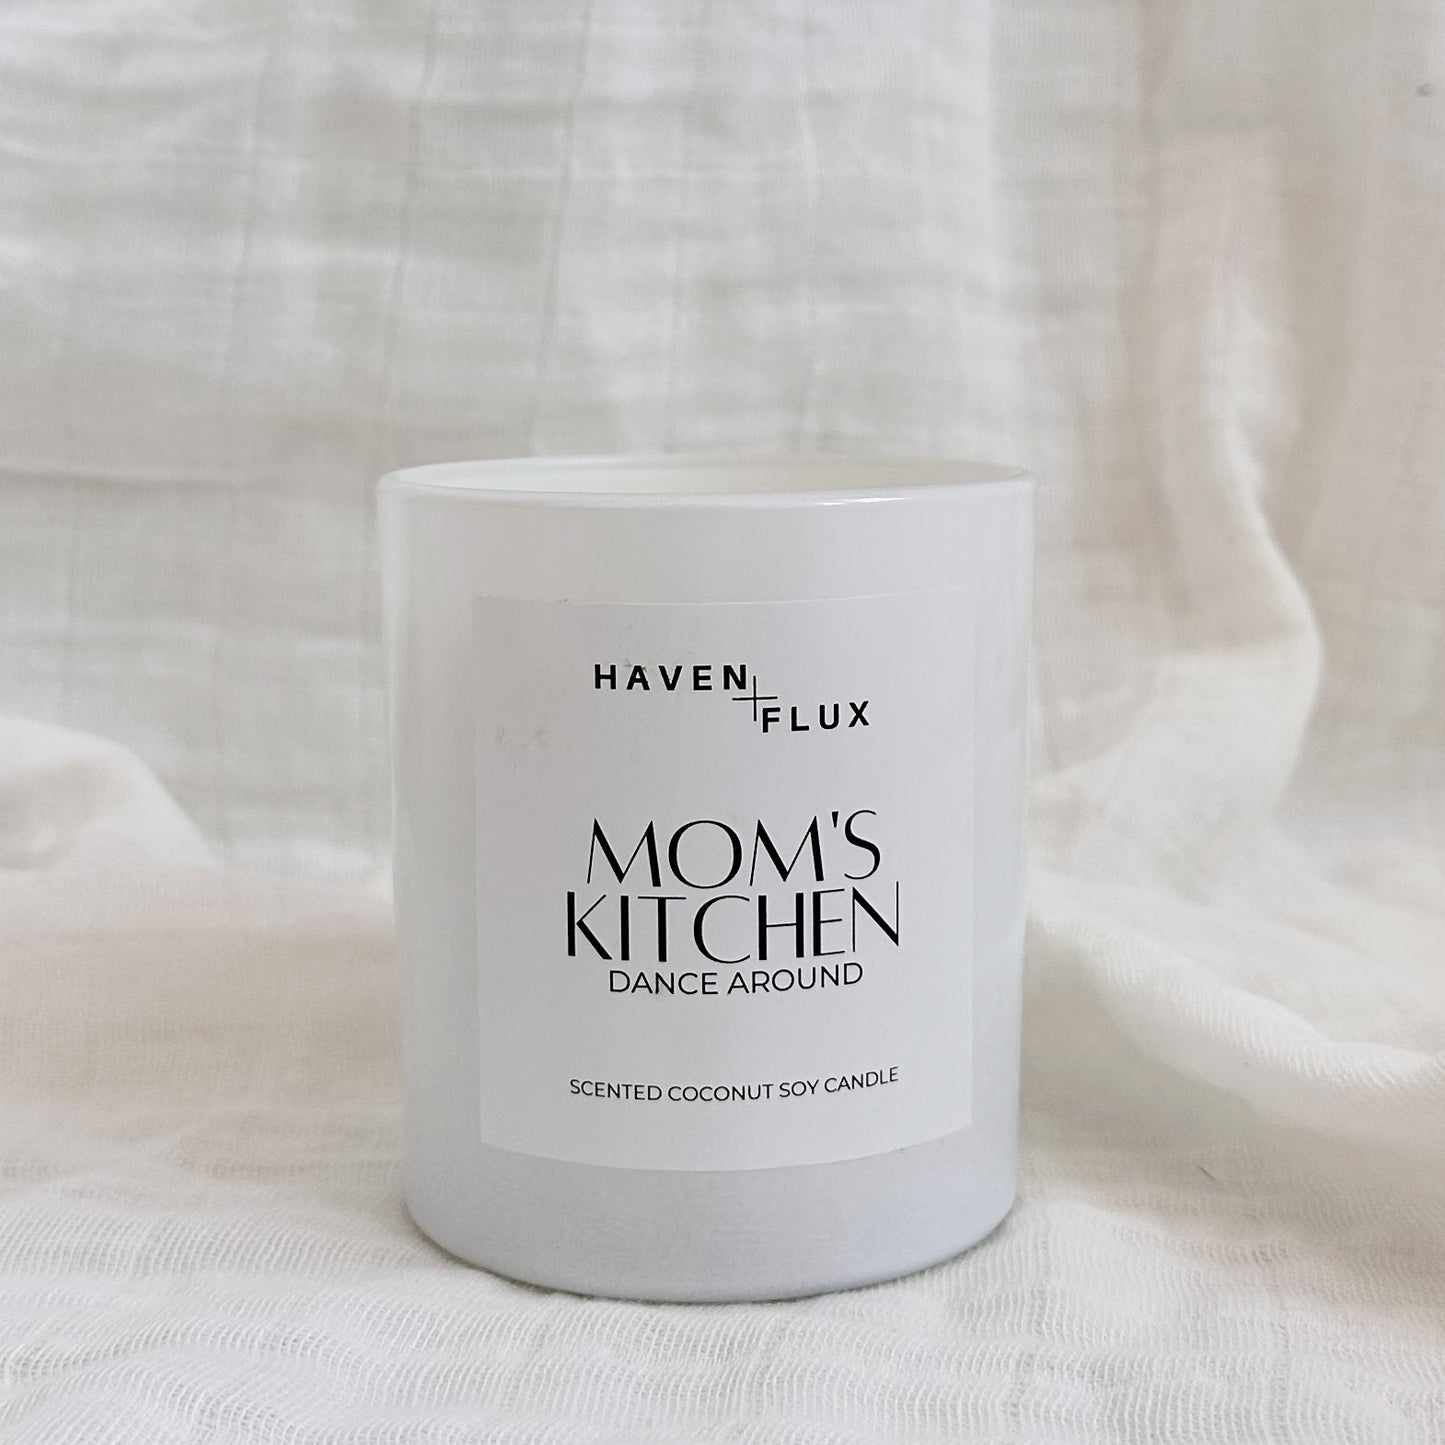 Non-Toxic Coconut Soy Wax Wooden Wick Mom's Kitchen, Dance Around Fall Intention Candle for Mental Health